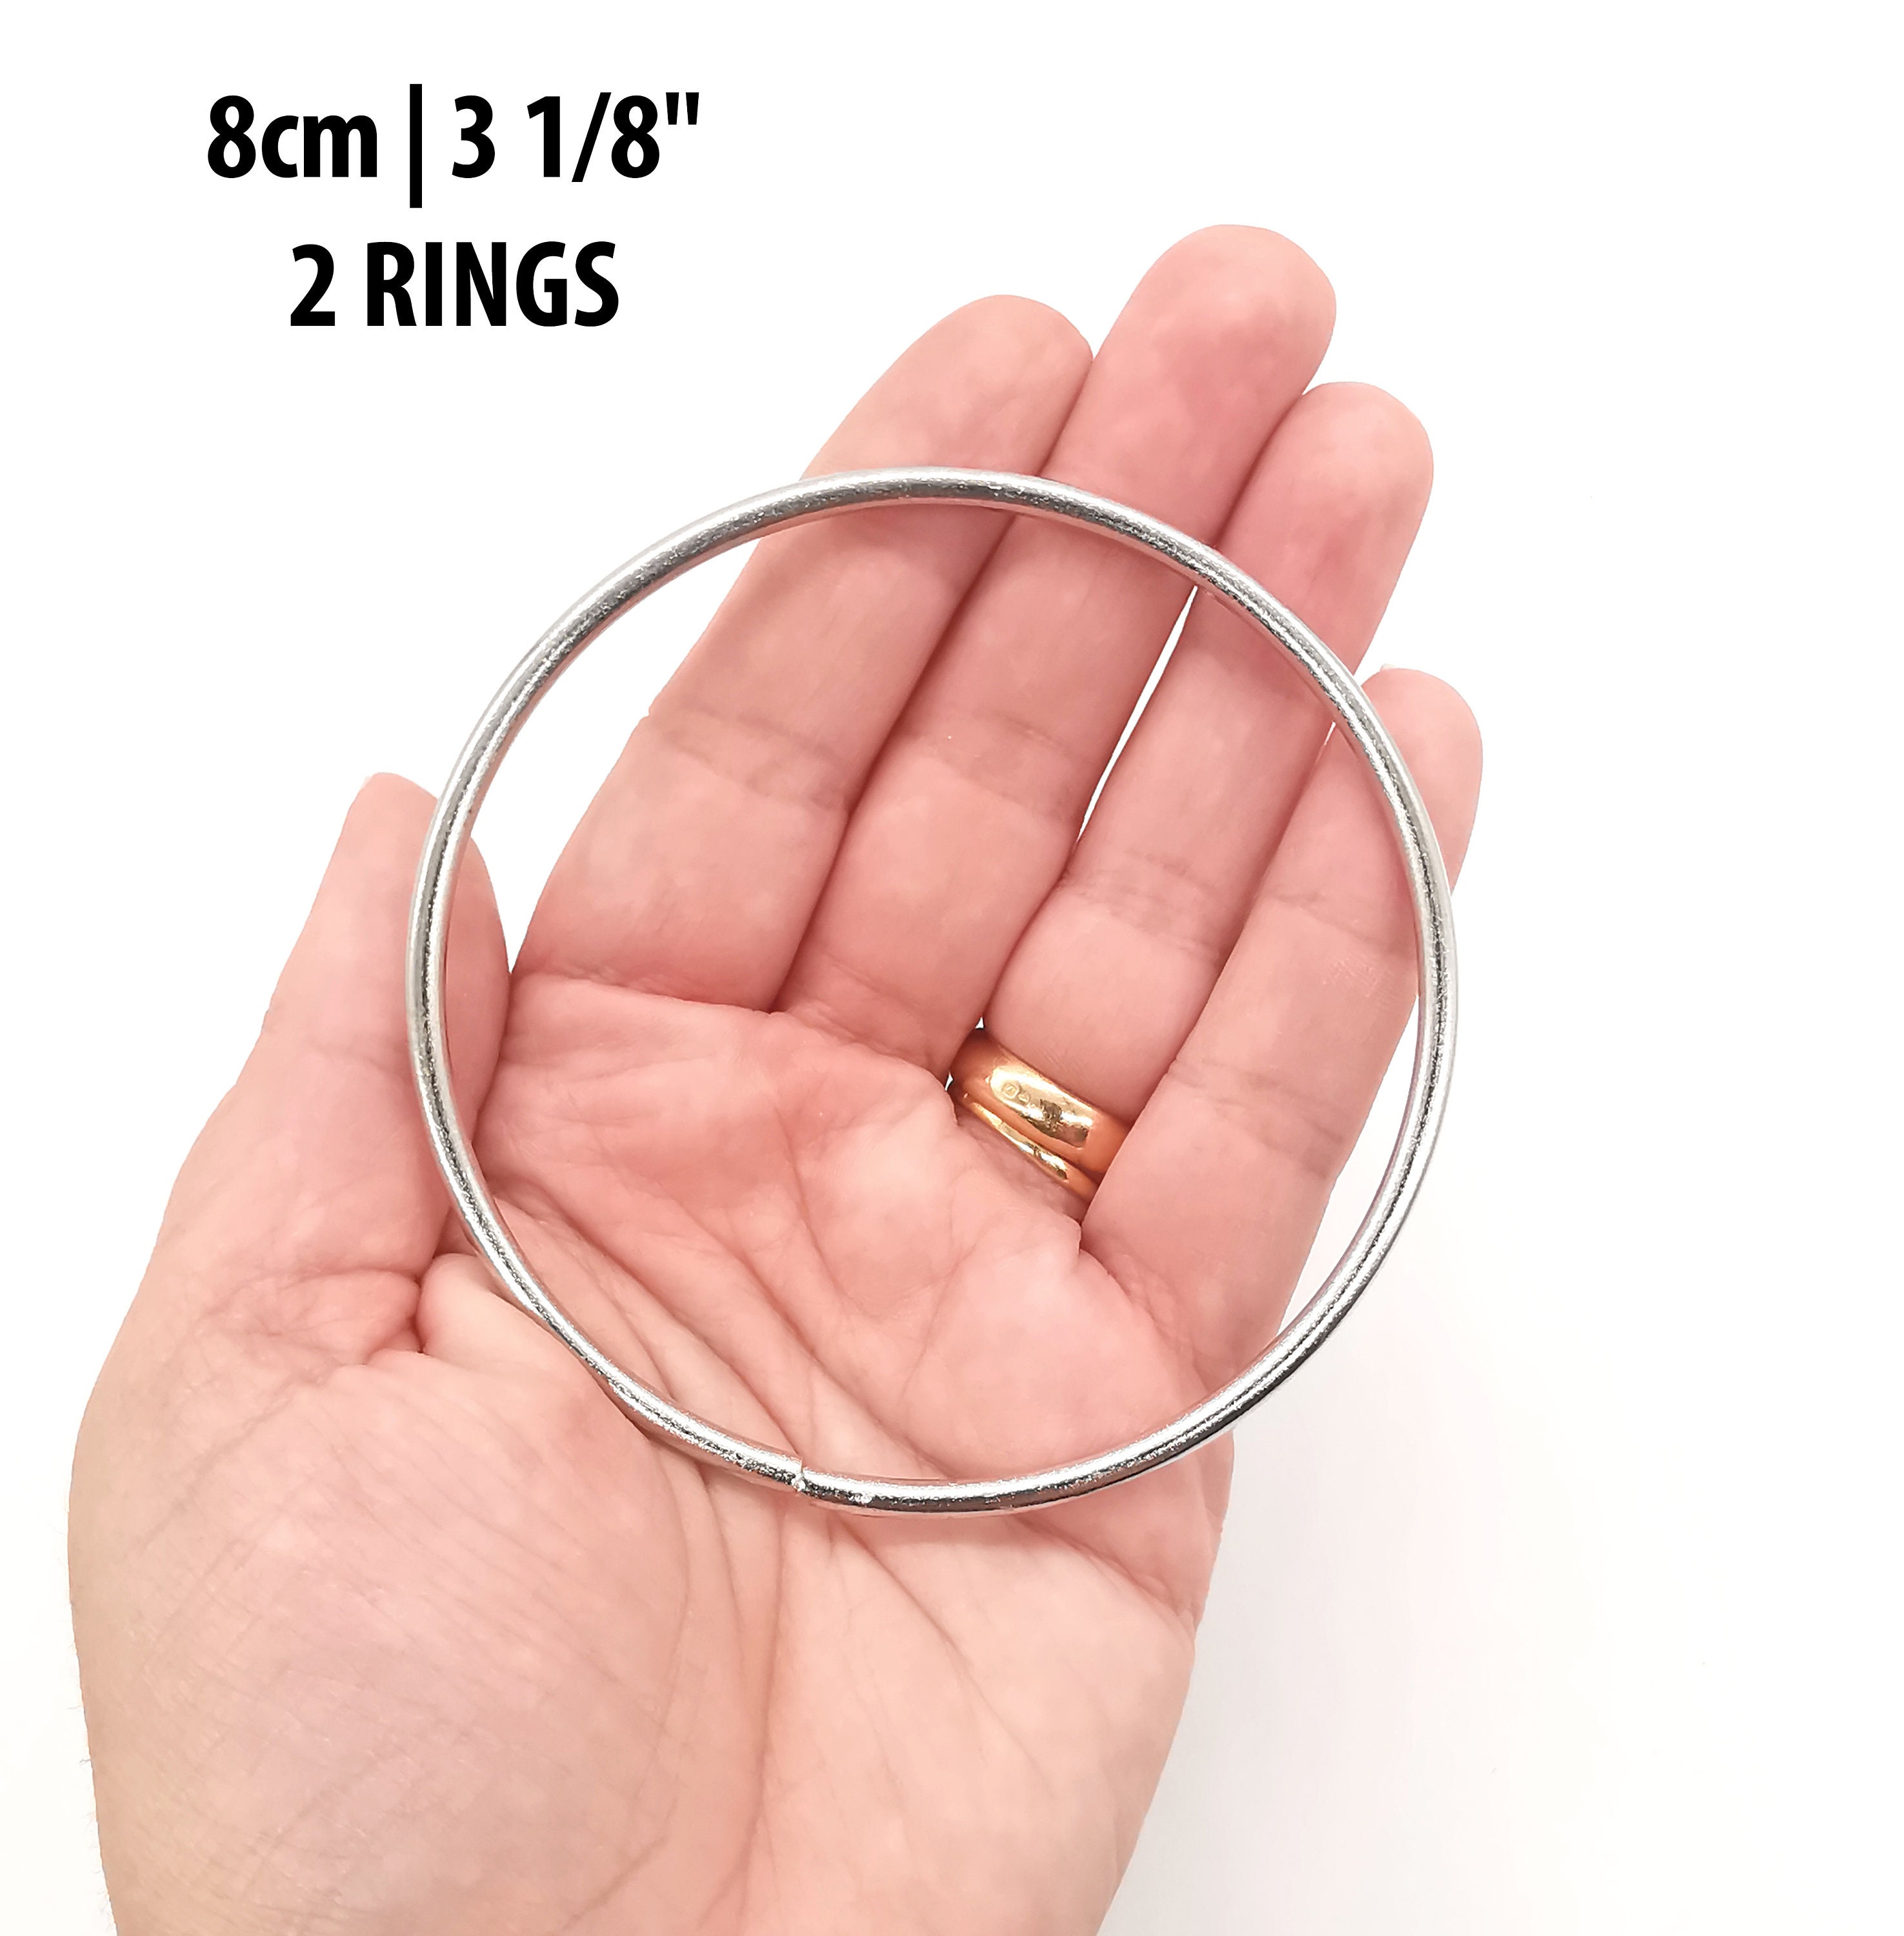 11 pcs 8 inch Dream Catcher Rings Metal Hoops Ring for Crafts Macrame with  Bar